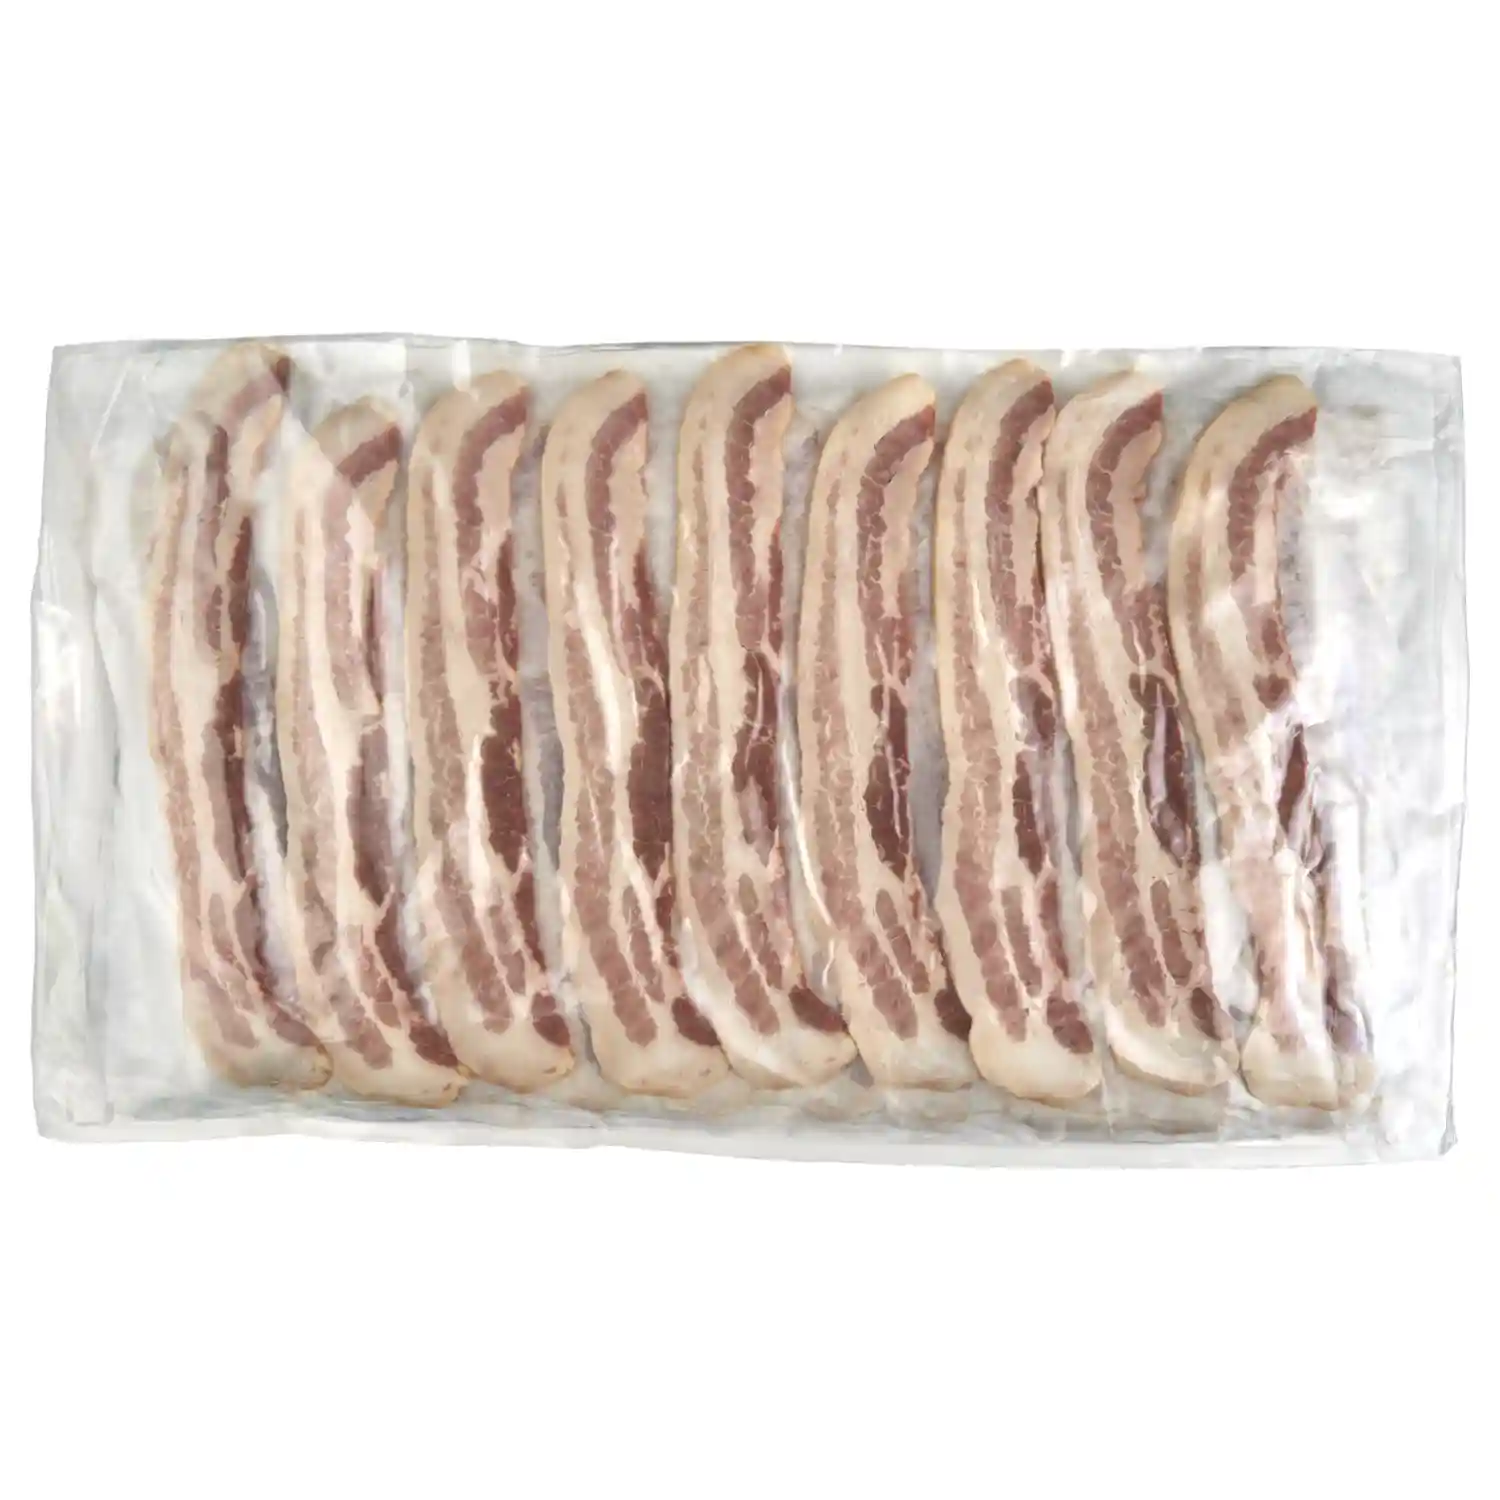 Wright® Brand Naturally Hickory Smoked Thick Sliced Bacon, Flat-Pack®, 10-14 Slices per Pound, Gas Flushed_image_31